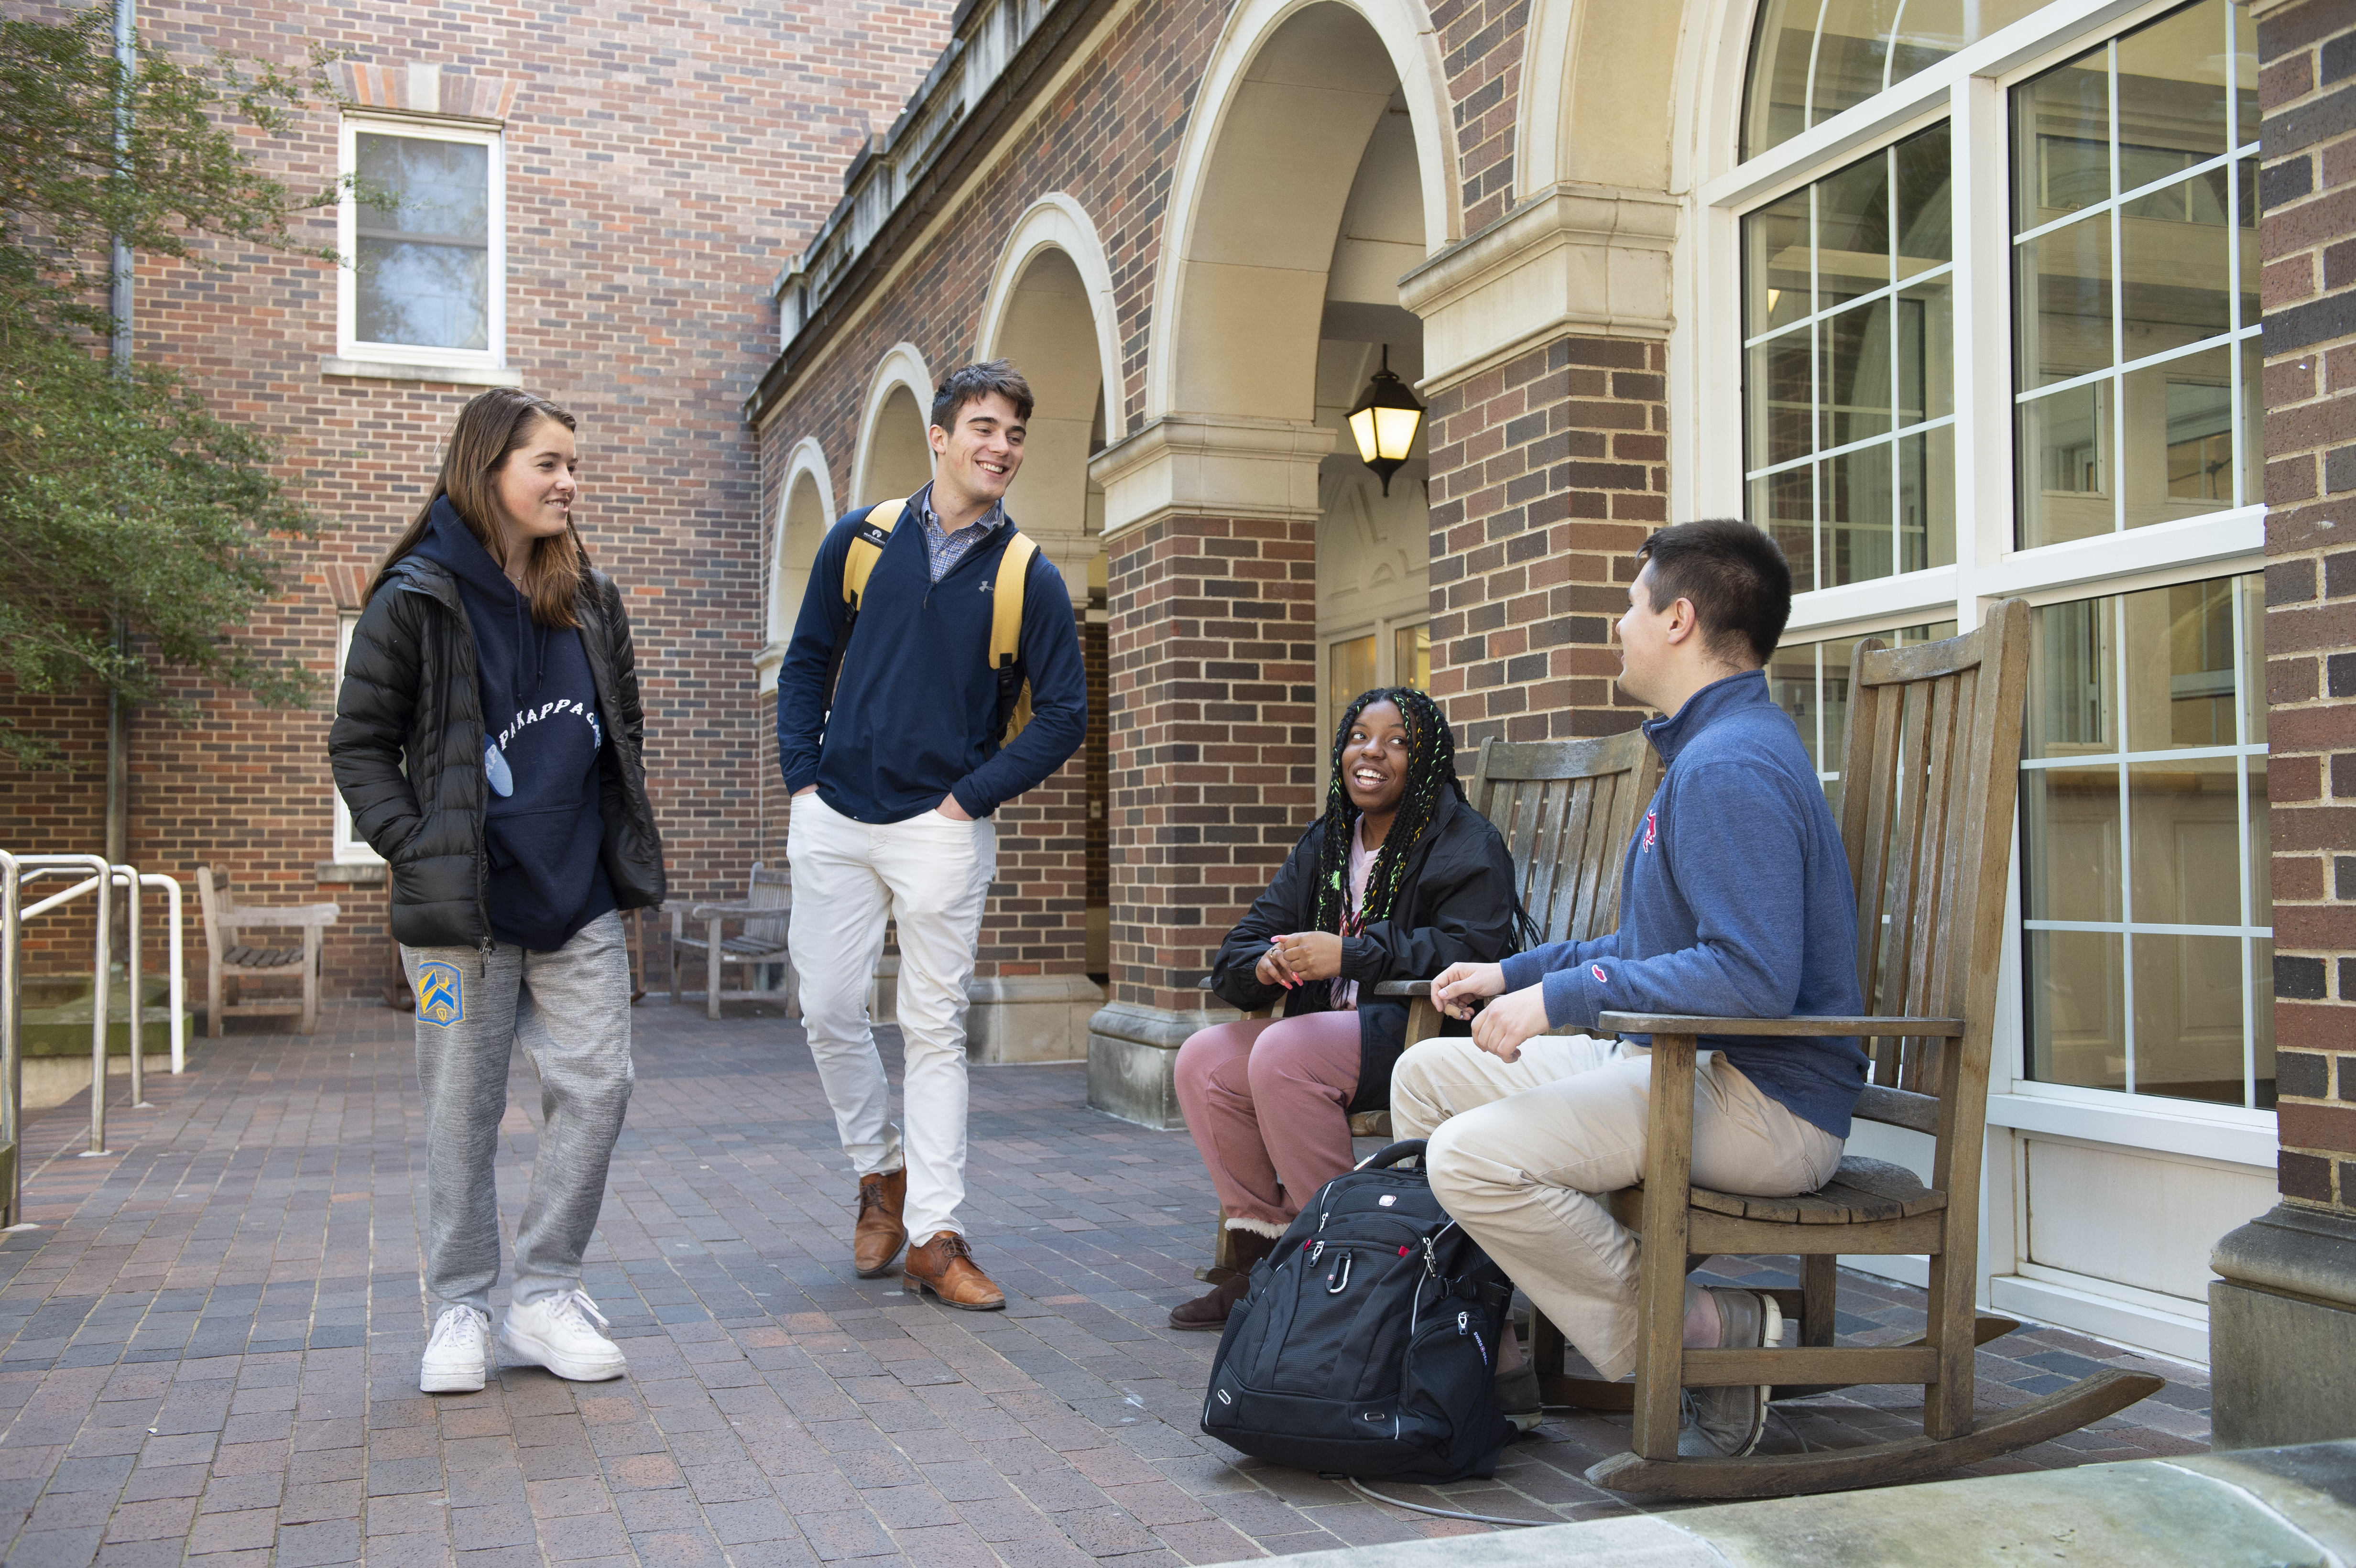 Two students sitting in rocking chairs talk to two students standing up in front of a residence hall.